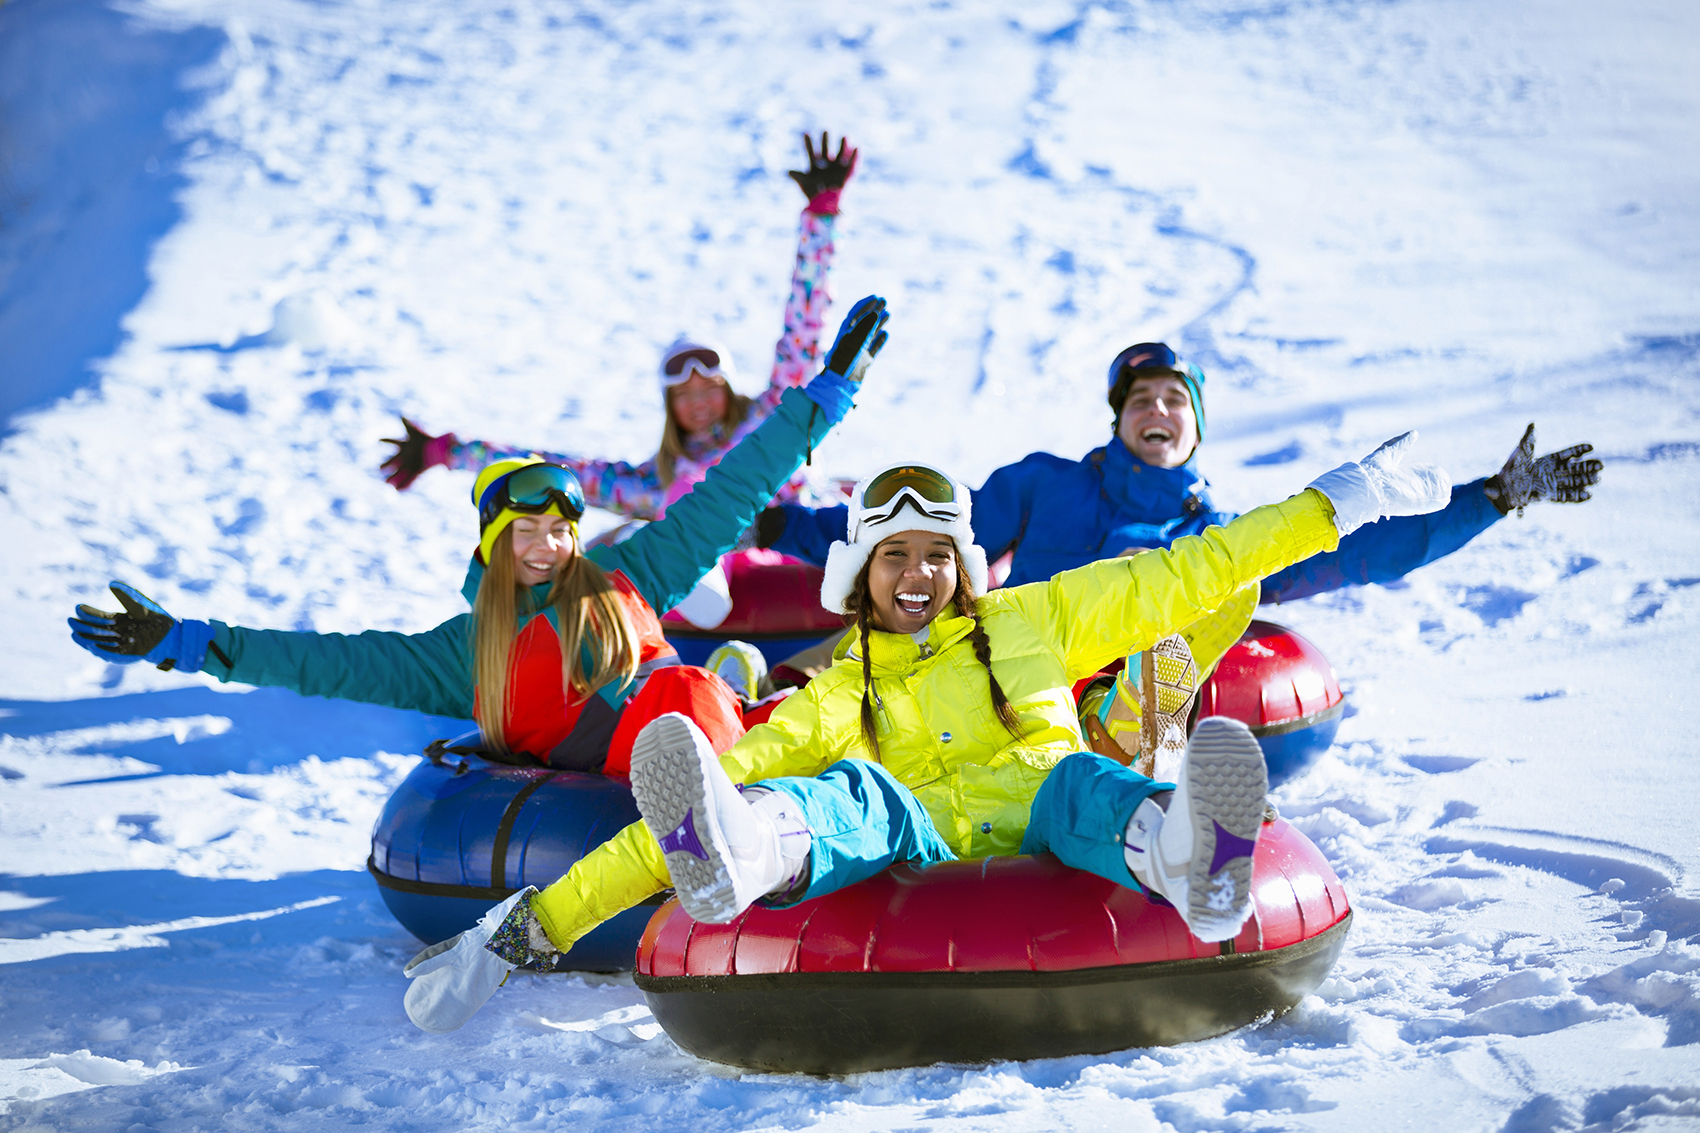 People in colorful jackets careening down a snowy slop on an inner tube.